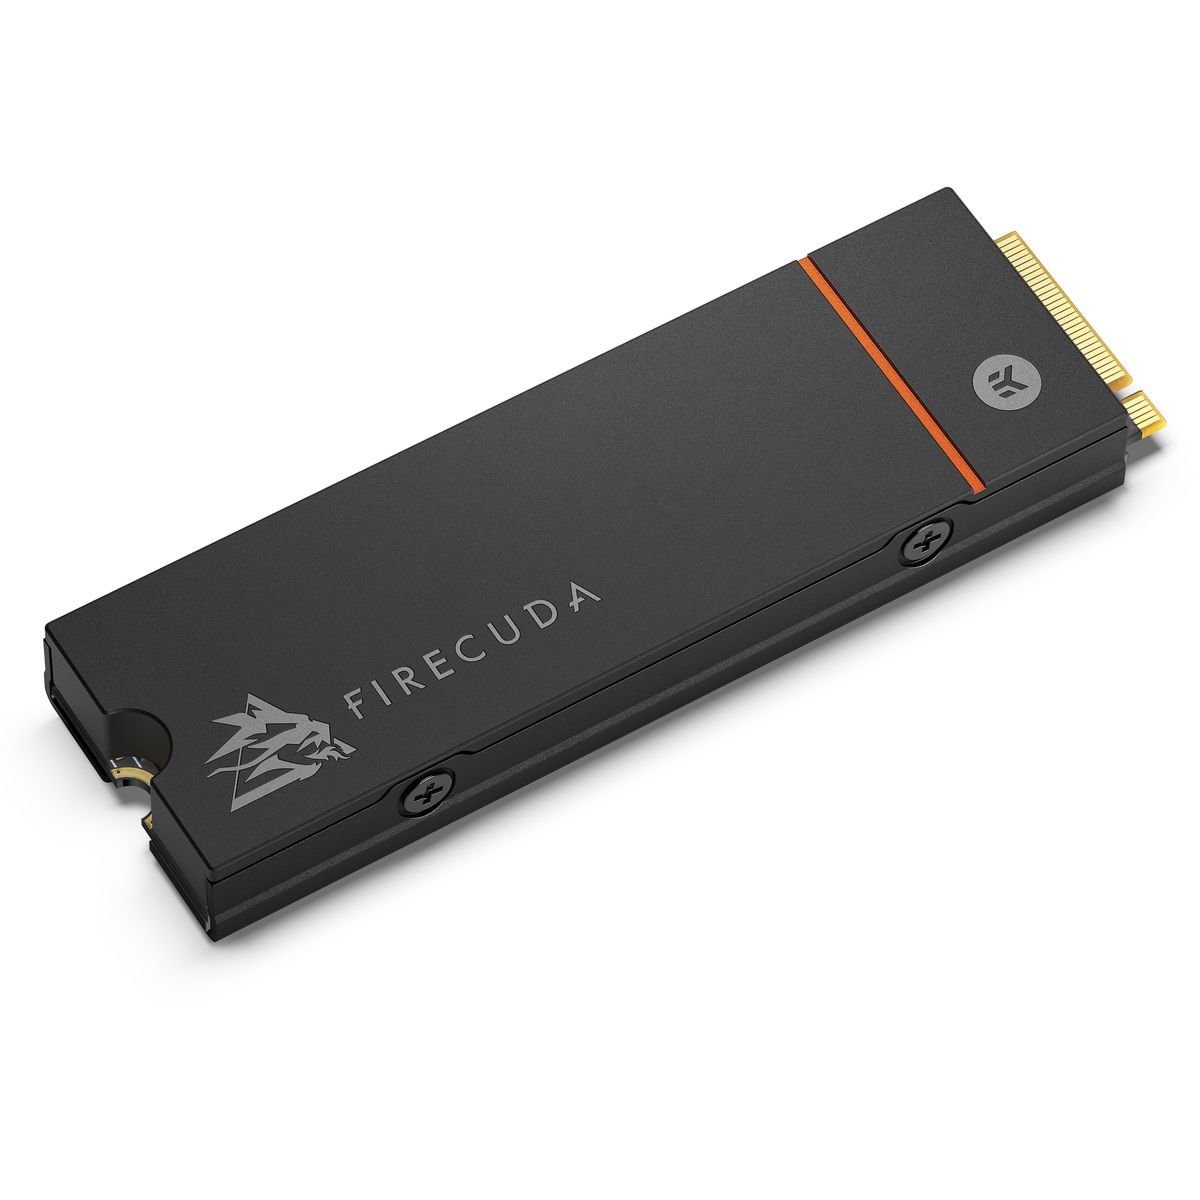 Seagate FireCuda 530 1TB SSD Review (tested with Windows 11)